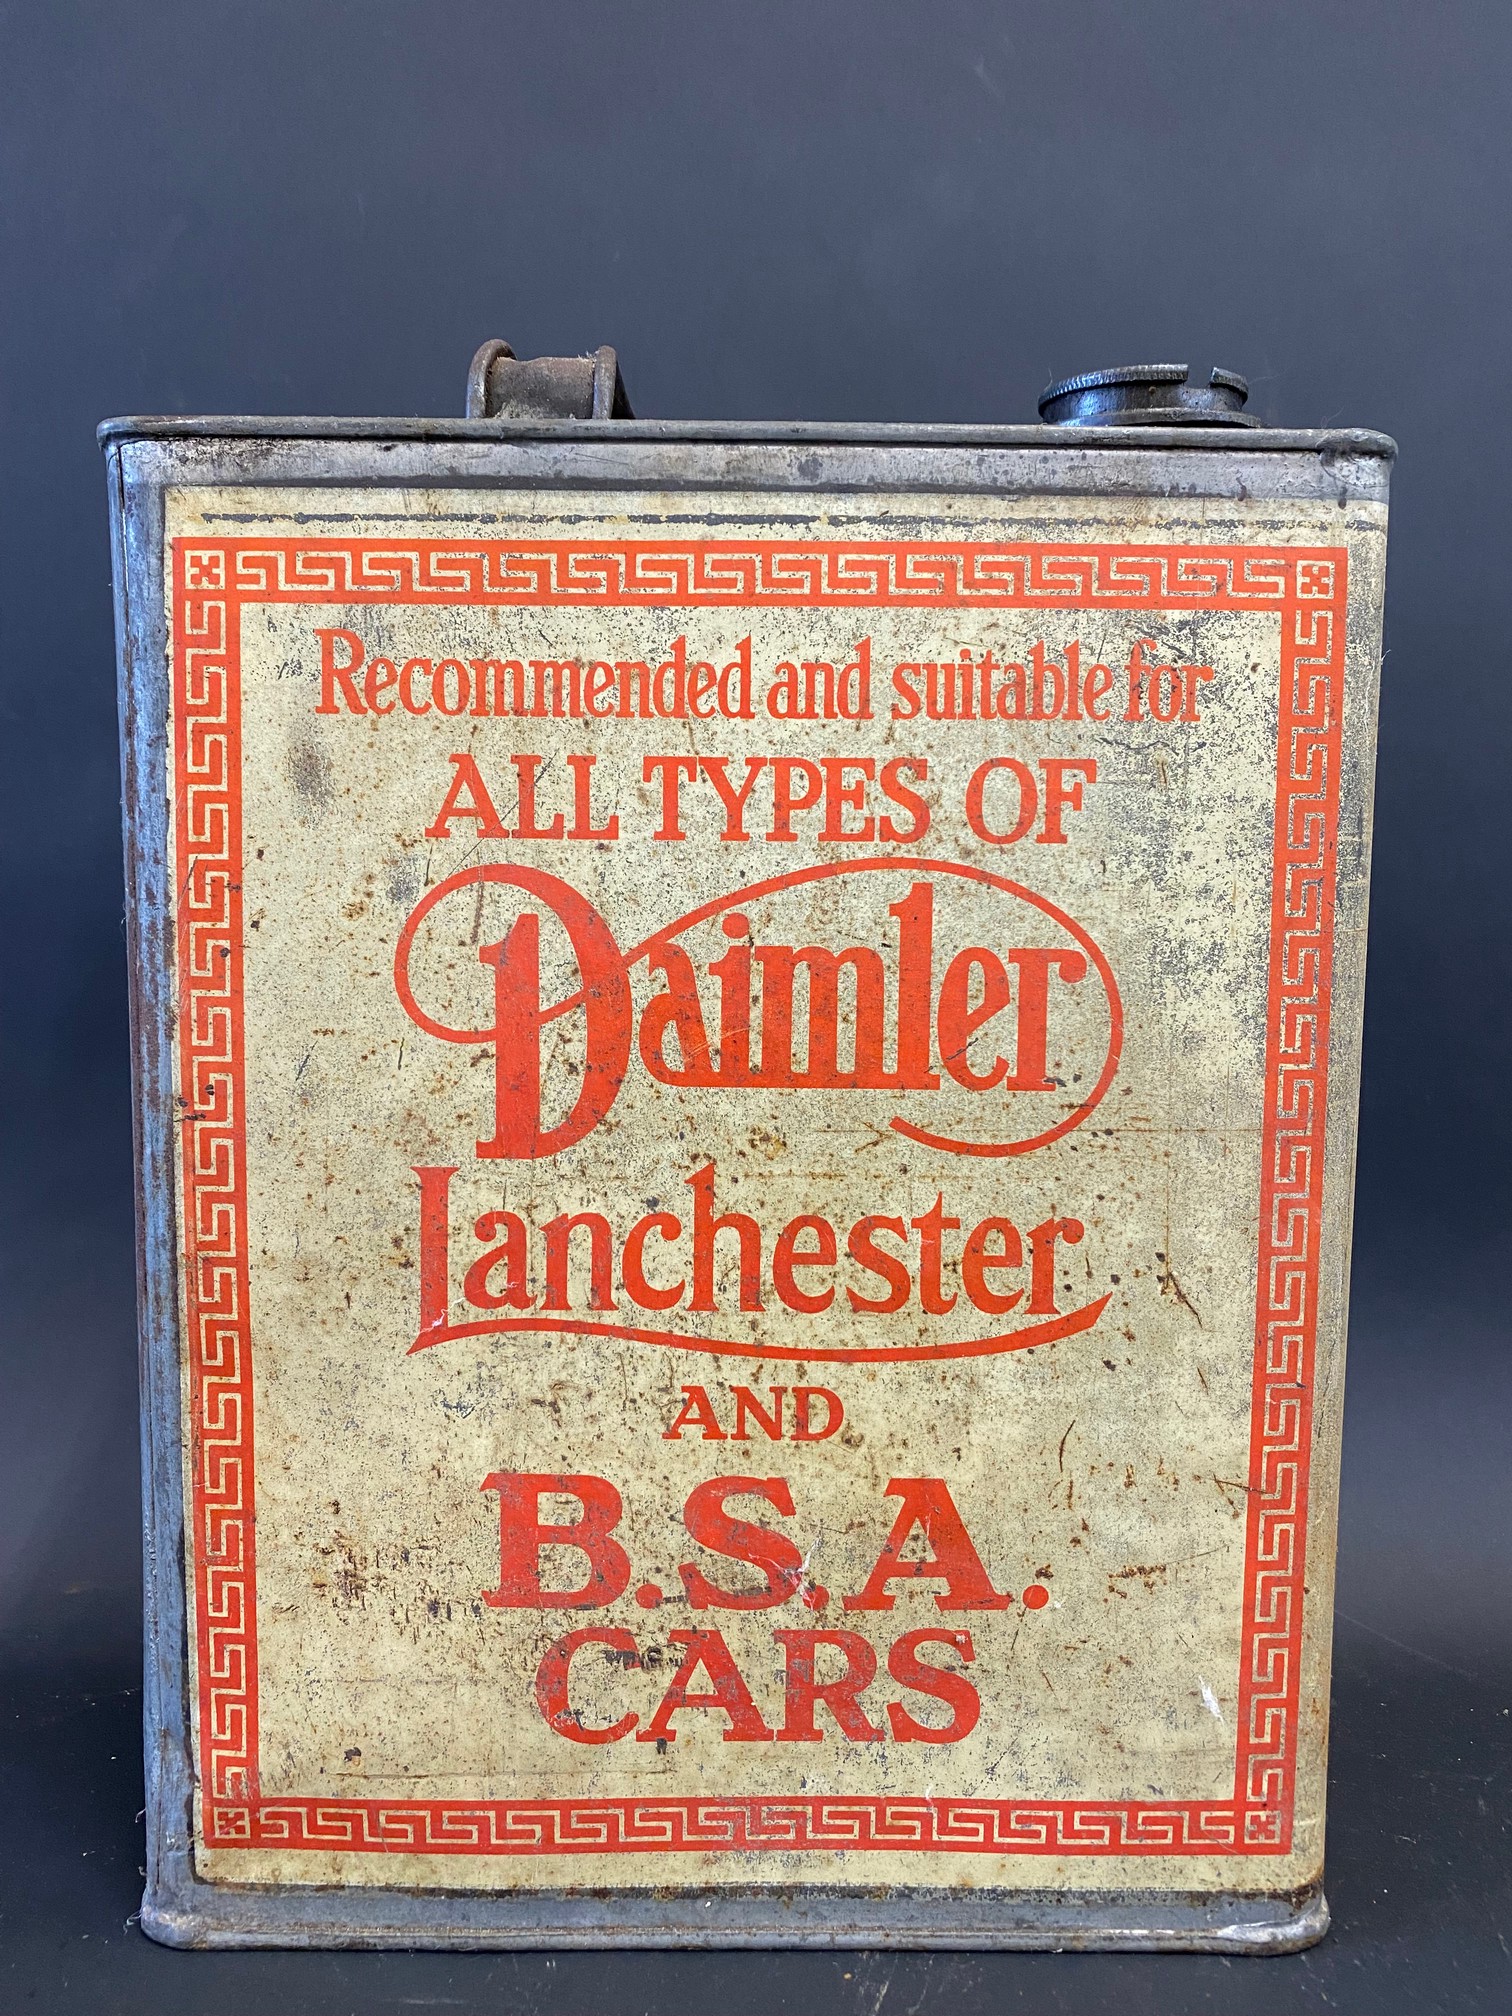 A self-changing oil for Daimler Lanchester & BSA cars gallon can.